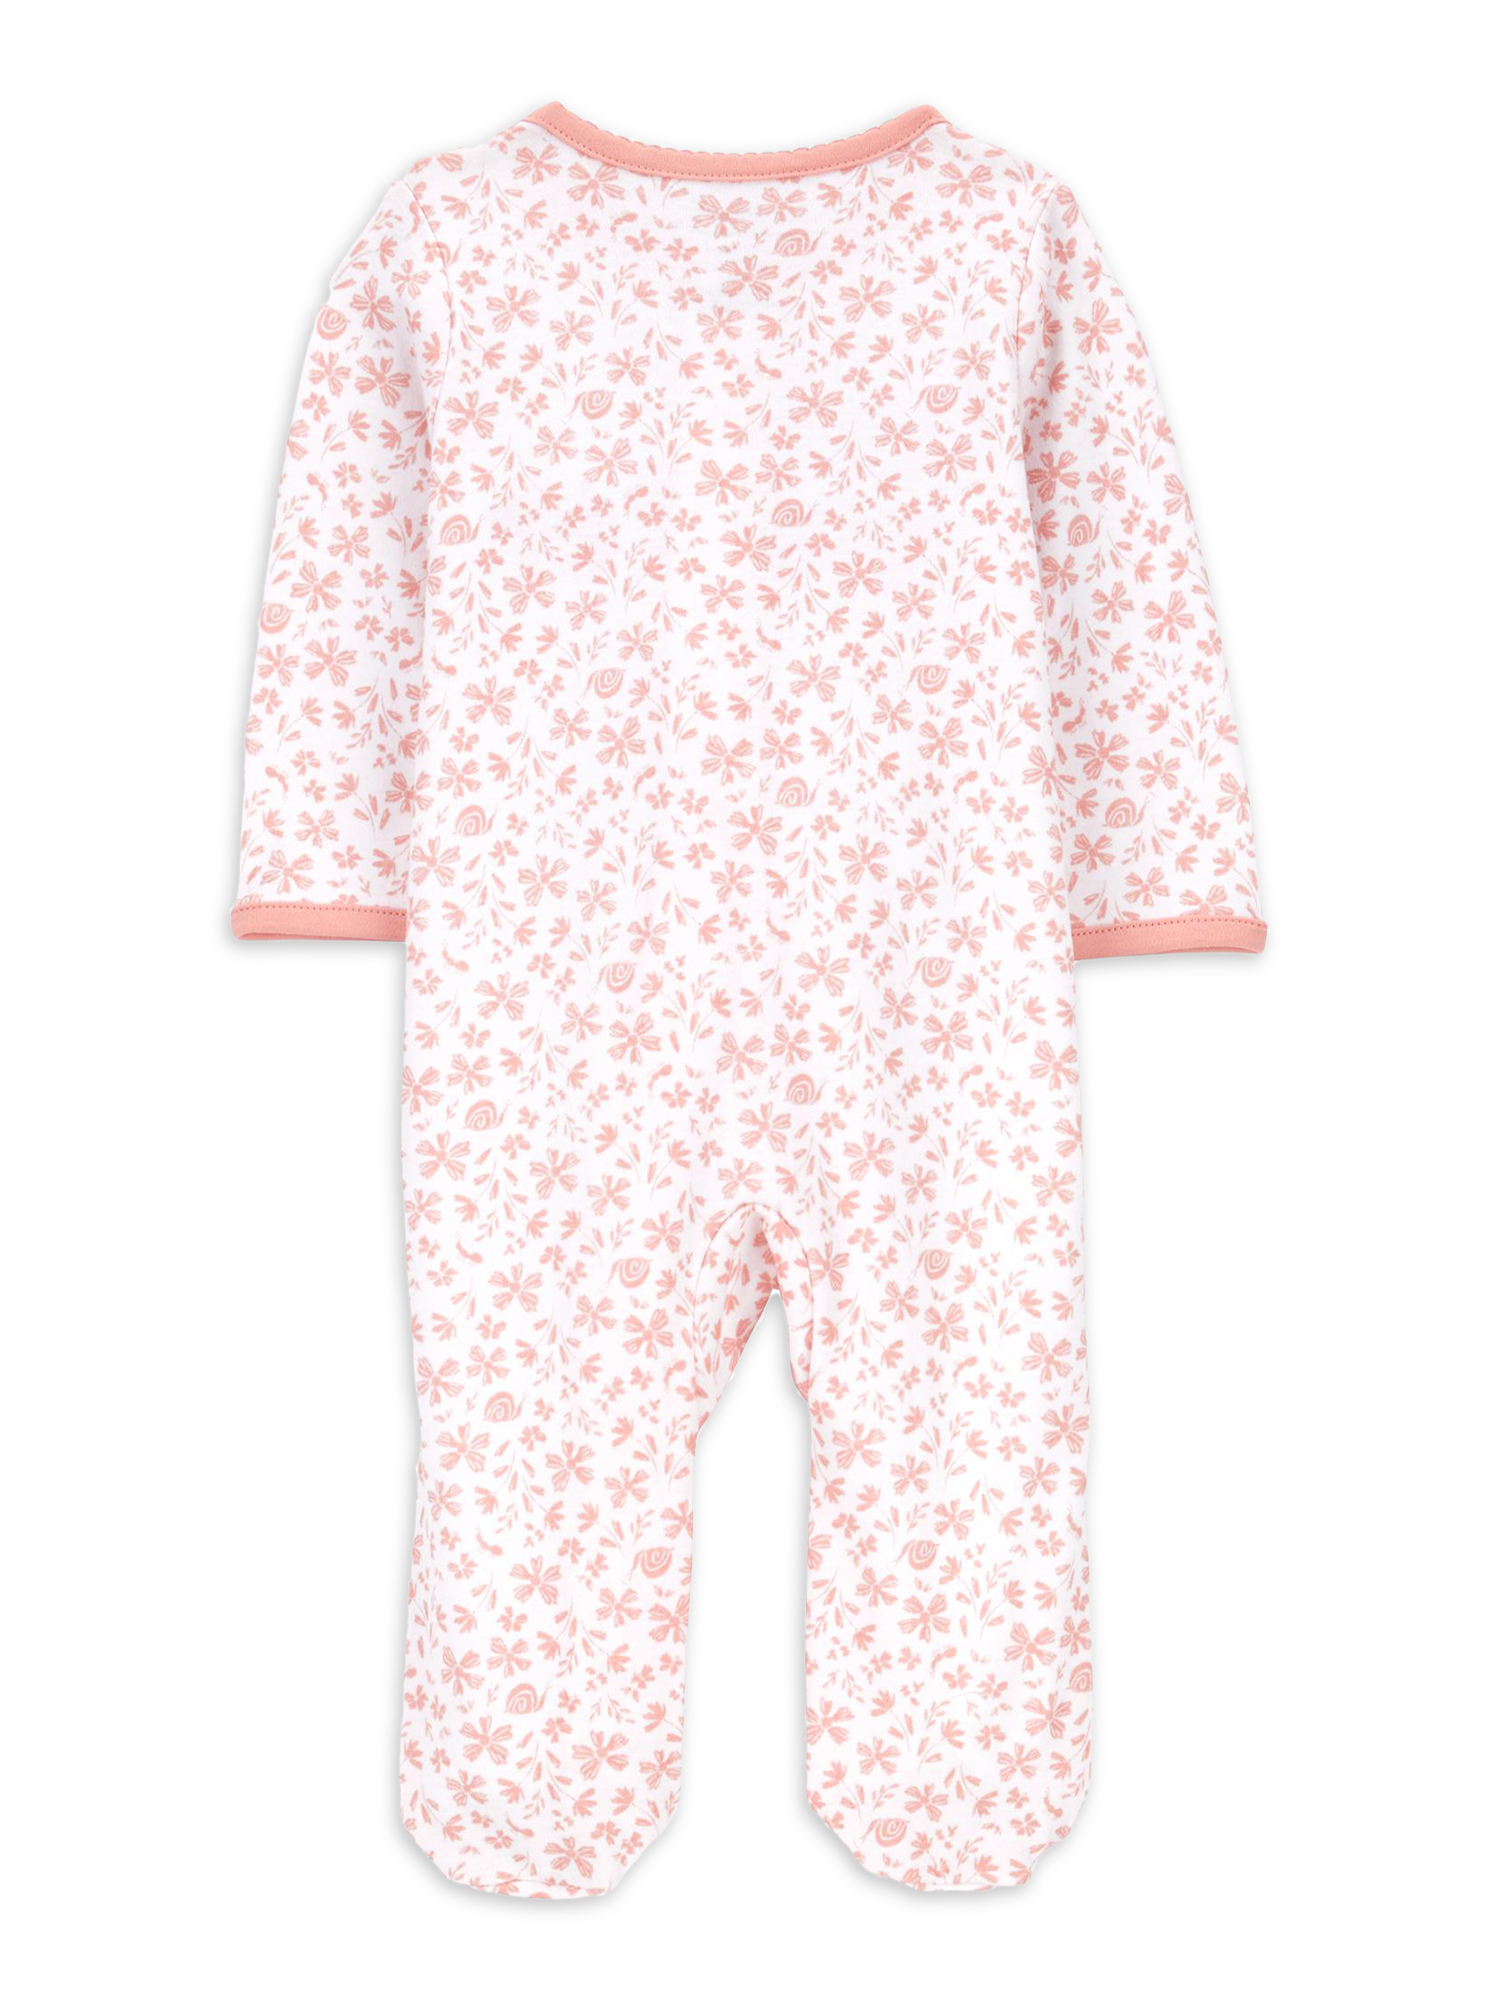 Carter's Child of Mine Baby Girl Sleep N Play, One-Piece, Sizes Preemie-6/9 Months - image 4 of 6